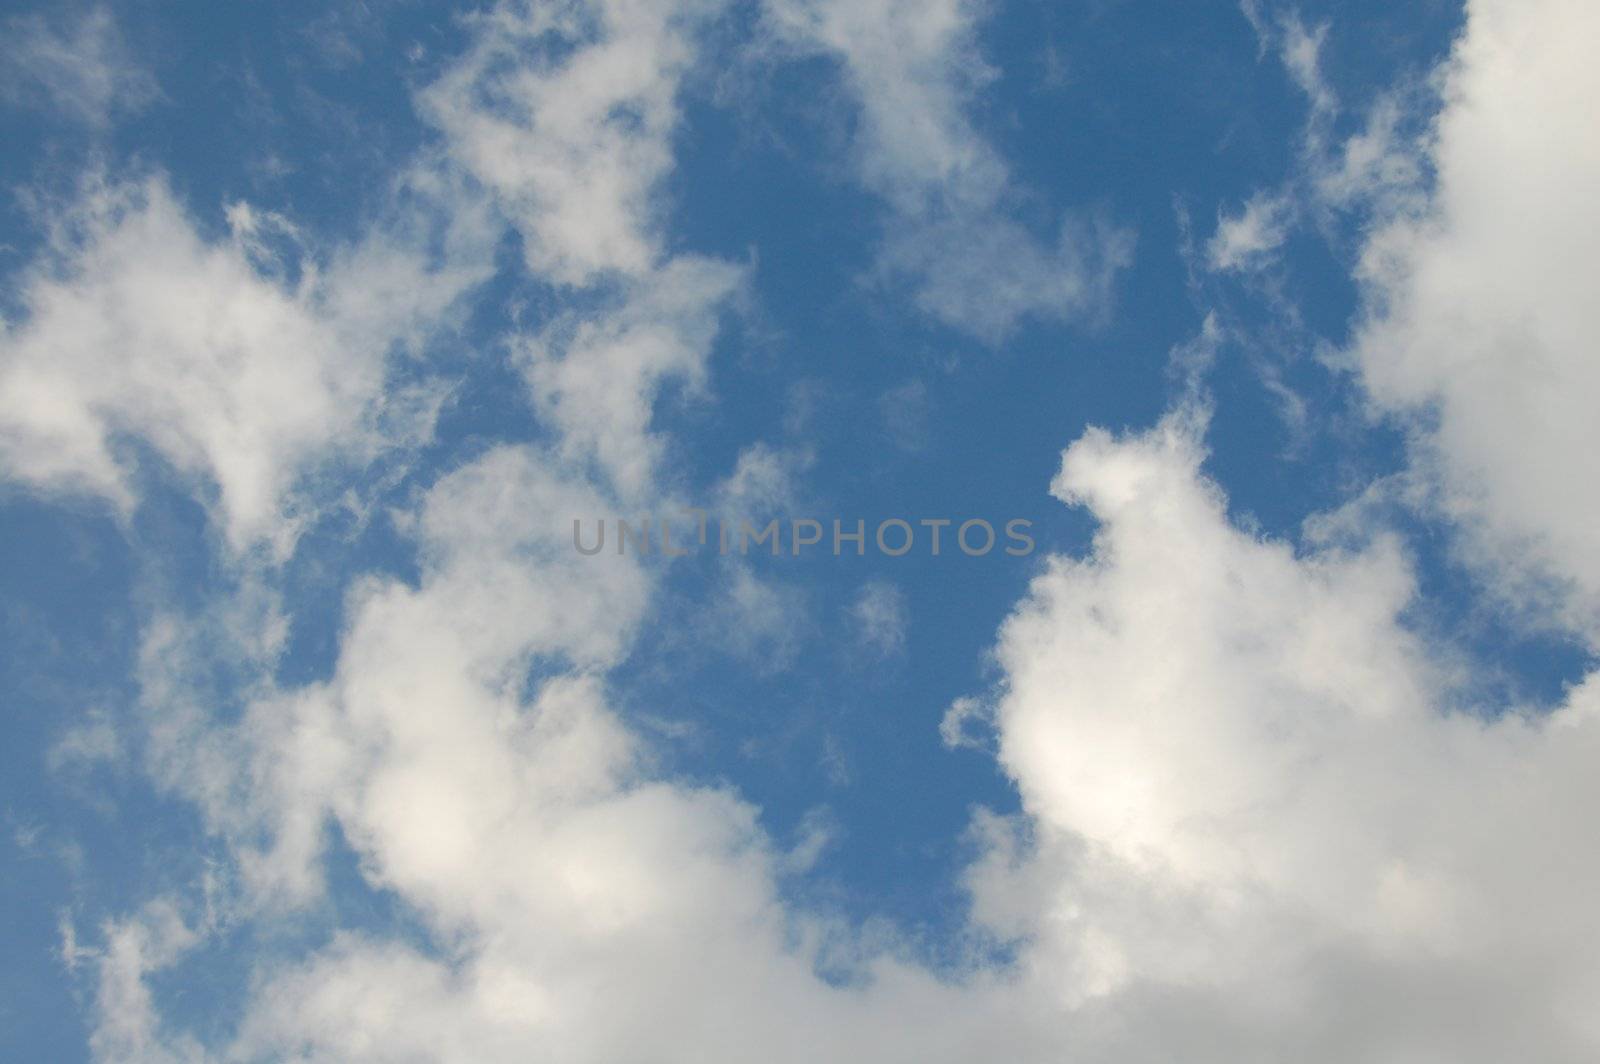 Clouds on blue sky by nikonite